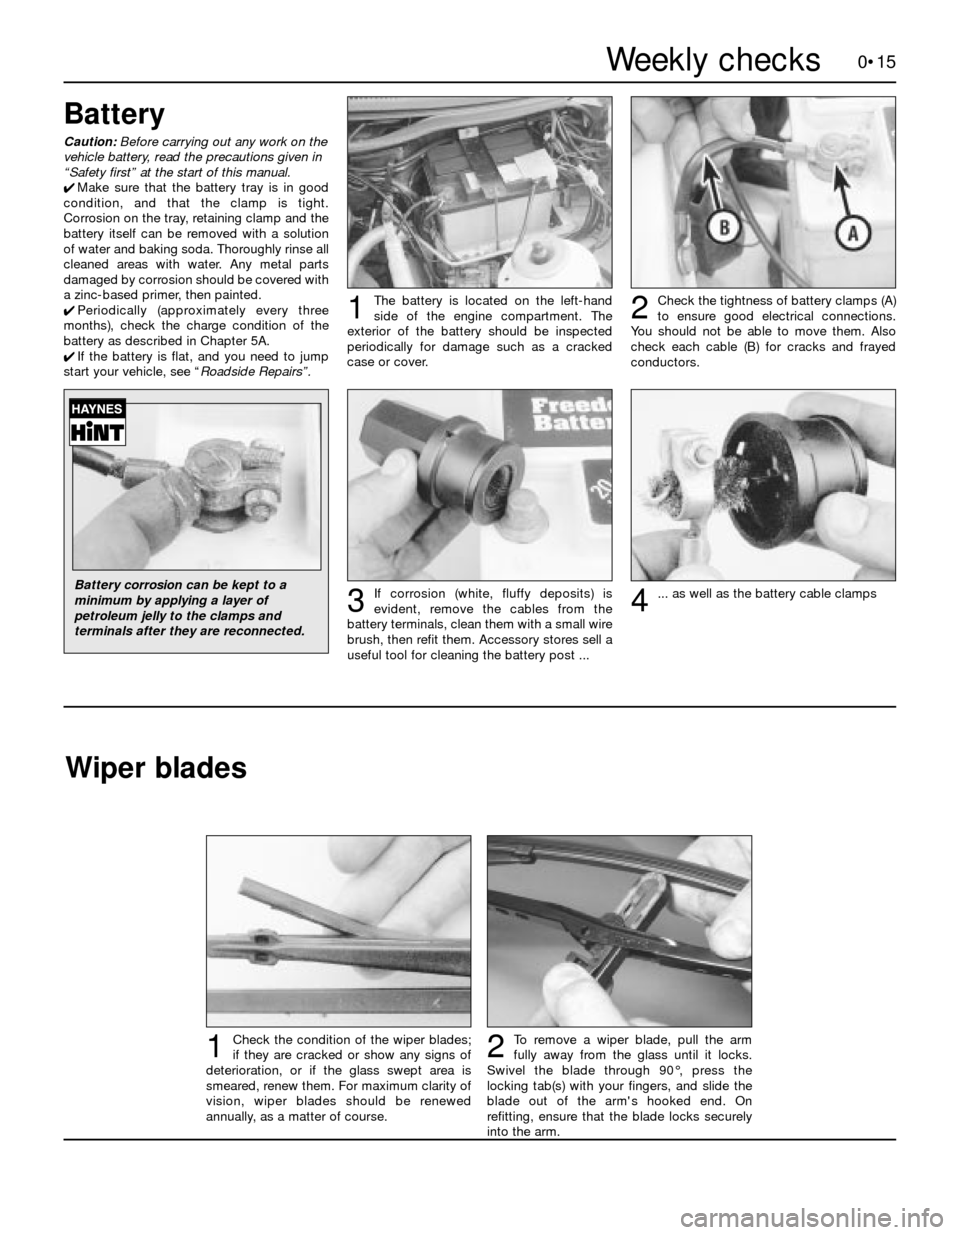 FORD SIERRA 1986 1.G Introduction User Guide 0•15
To remove a wiper blade, pull the arm
fully away from the glass until it locks.
Swivel the blade through 90°, press the
locking tab(s) with your fingers, and slide the
blade out of the arms h